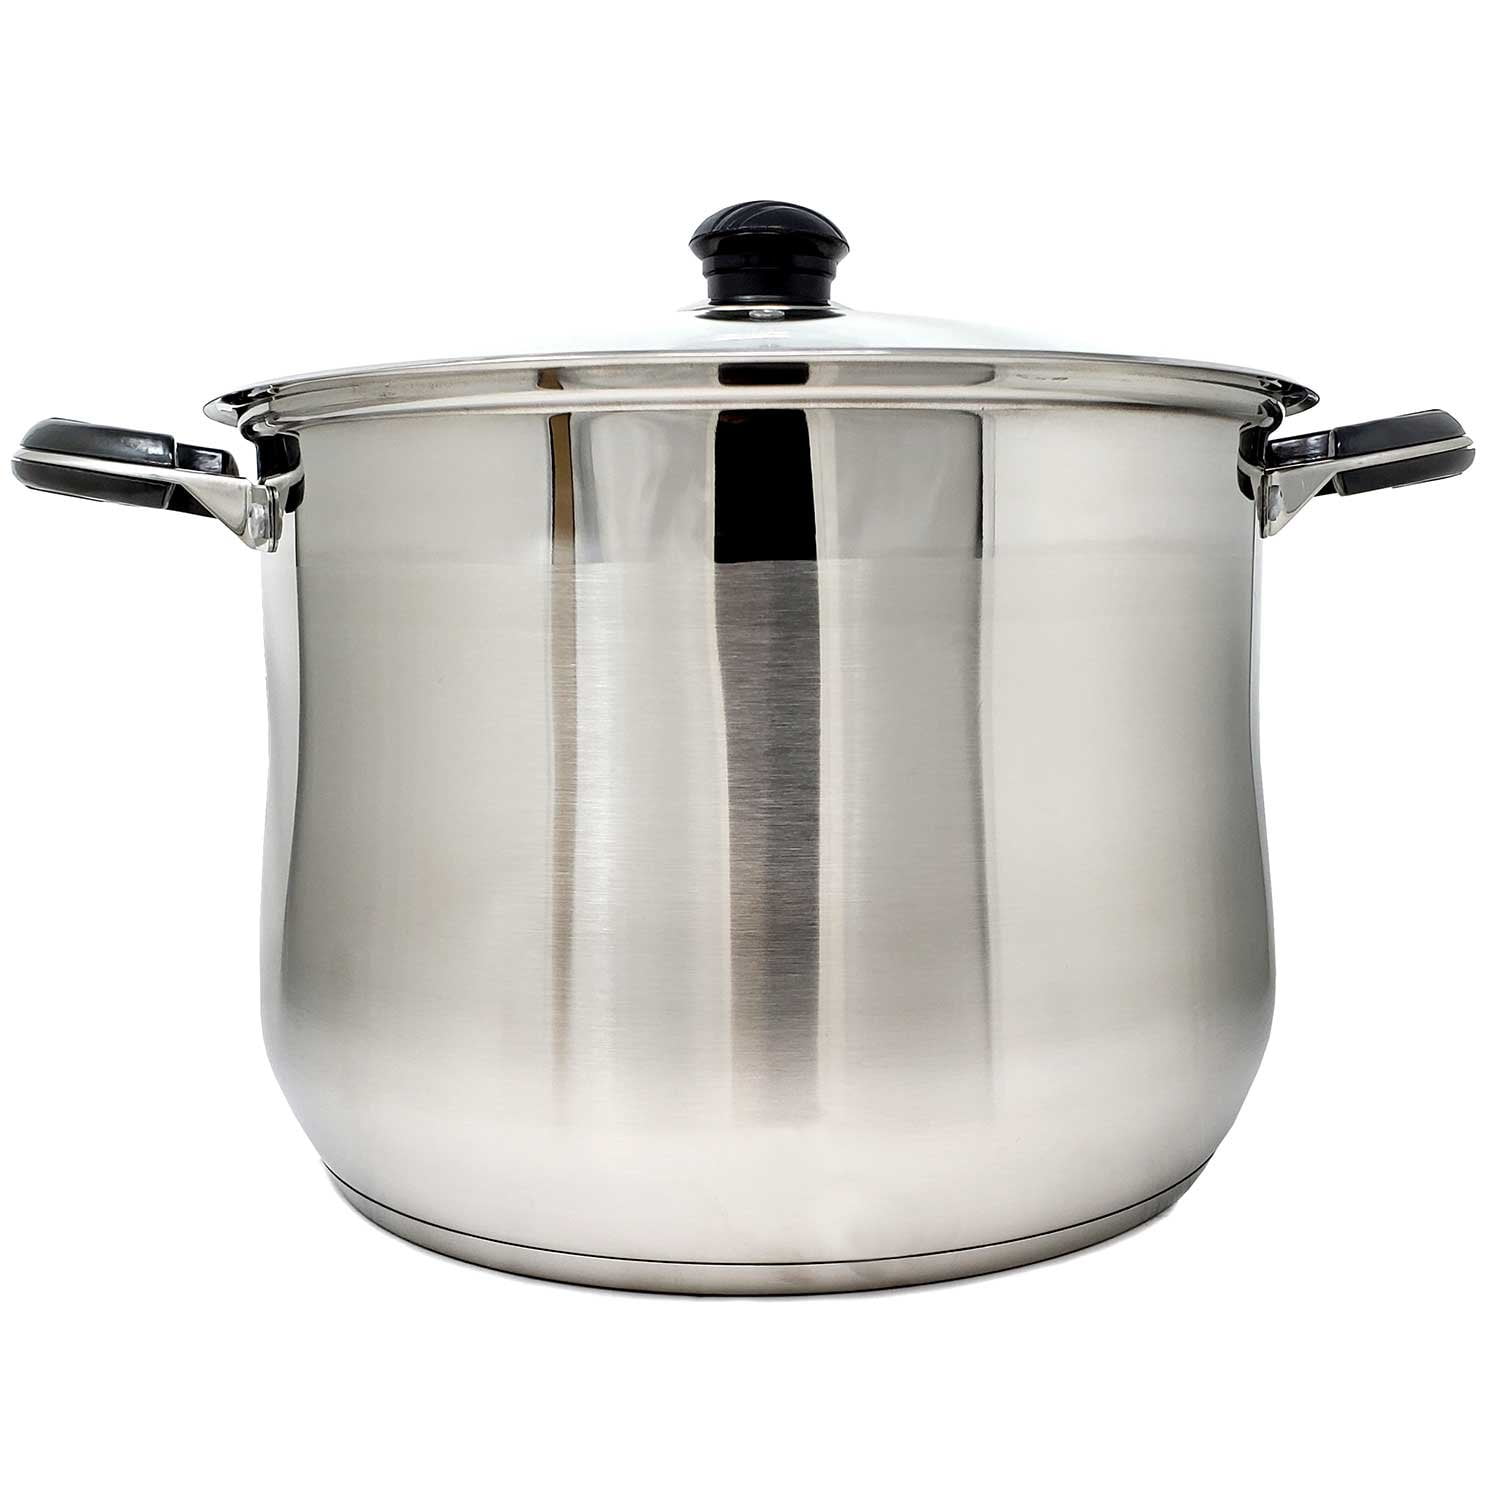 Stainless Steel Soup Stock, Pasta, Stew Pot with Glass Lid